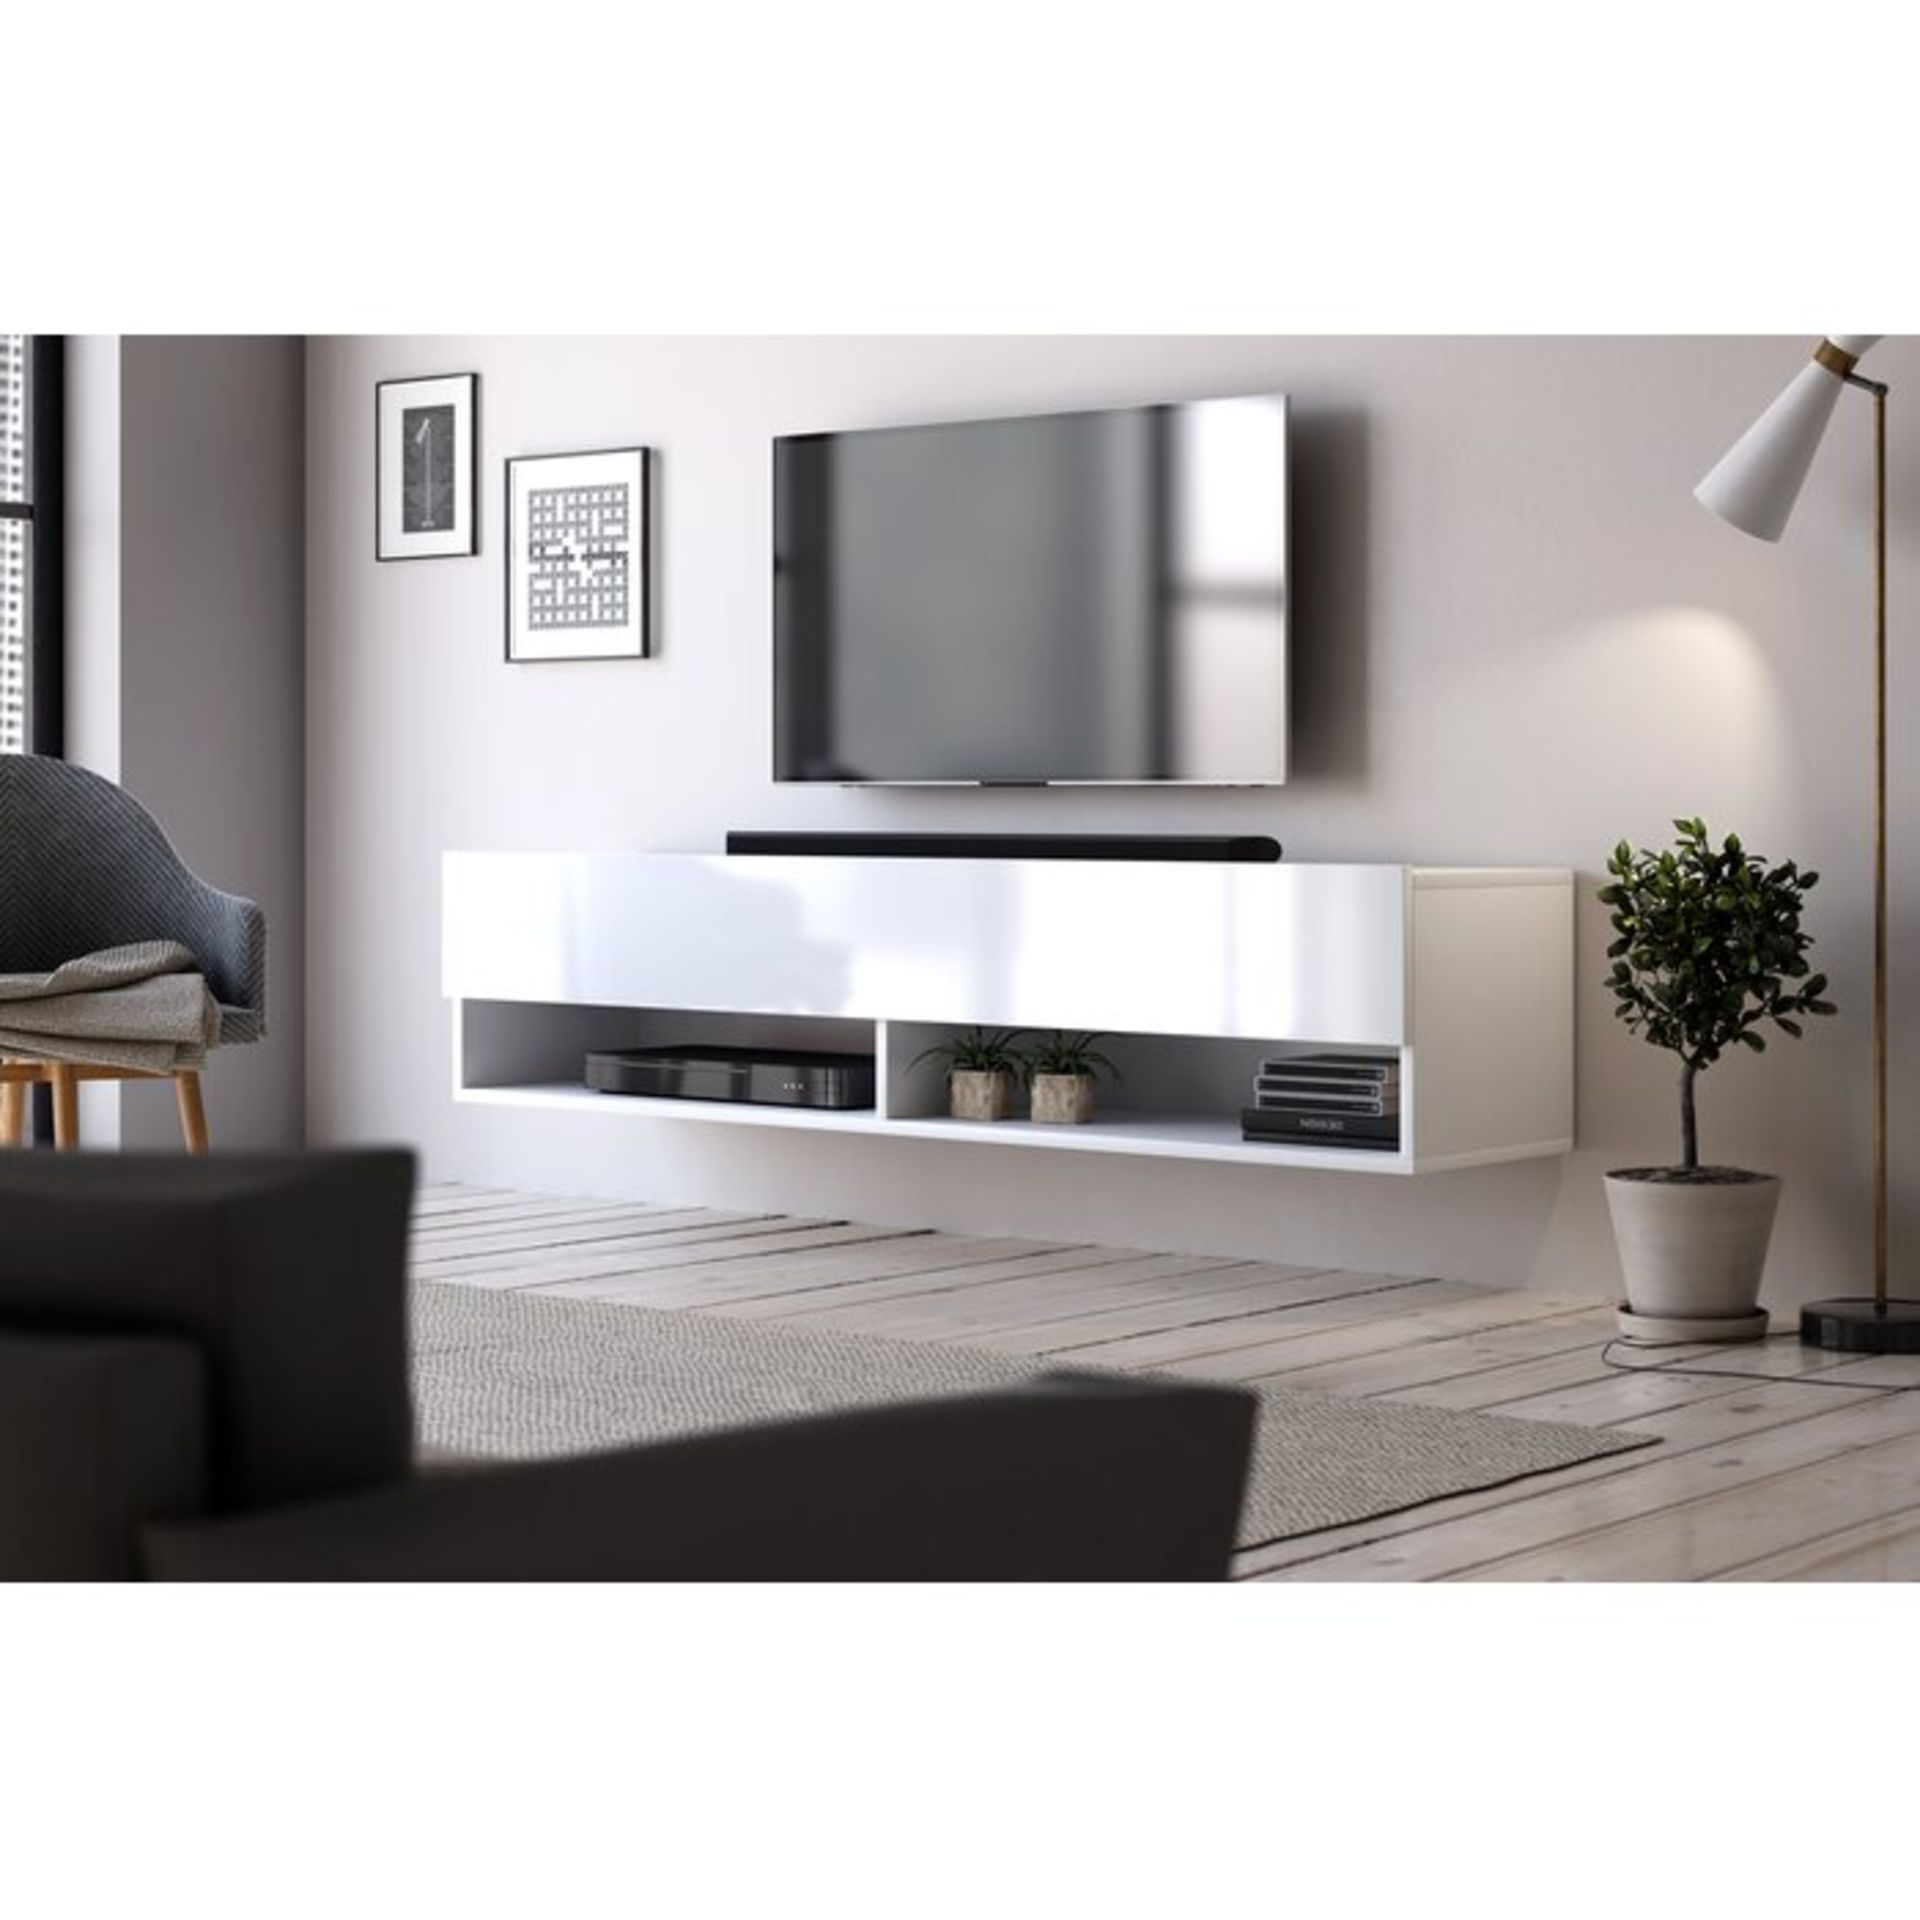 Wescott TV Stand for TVs up to 60"- RRP £95.99